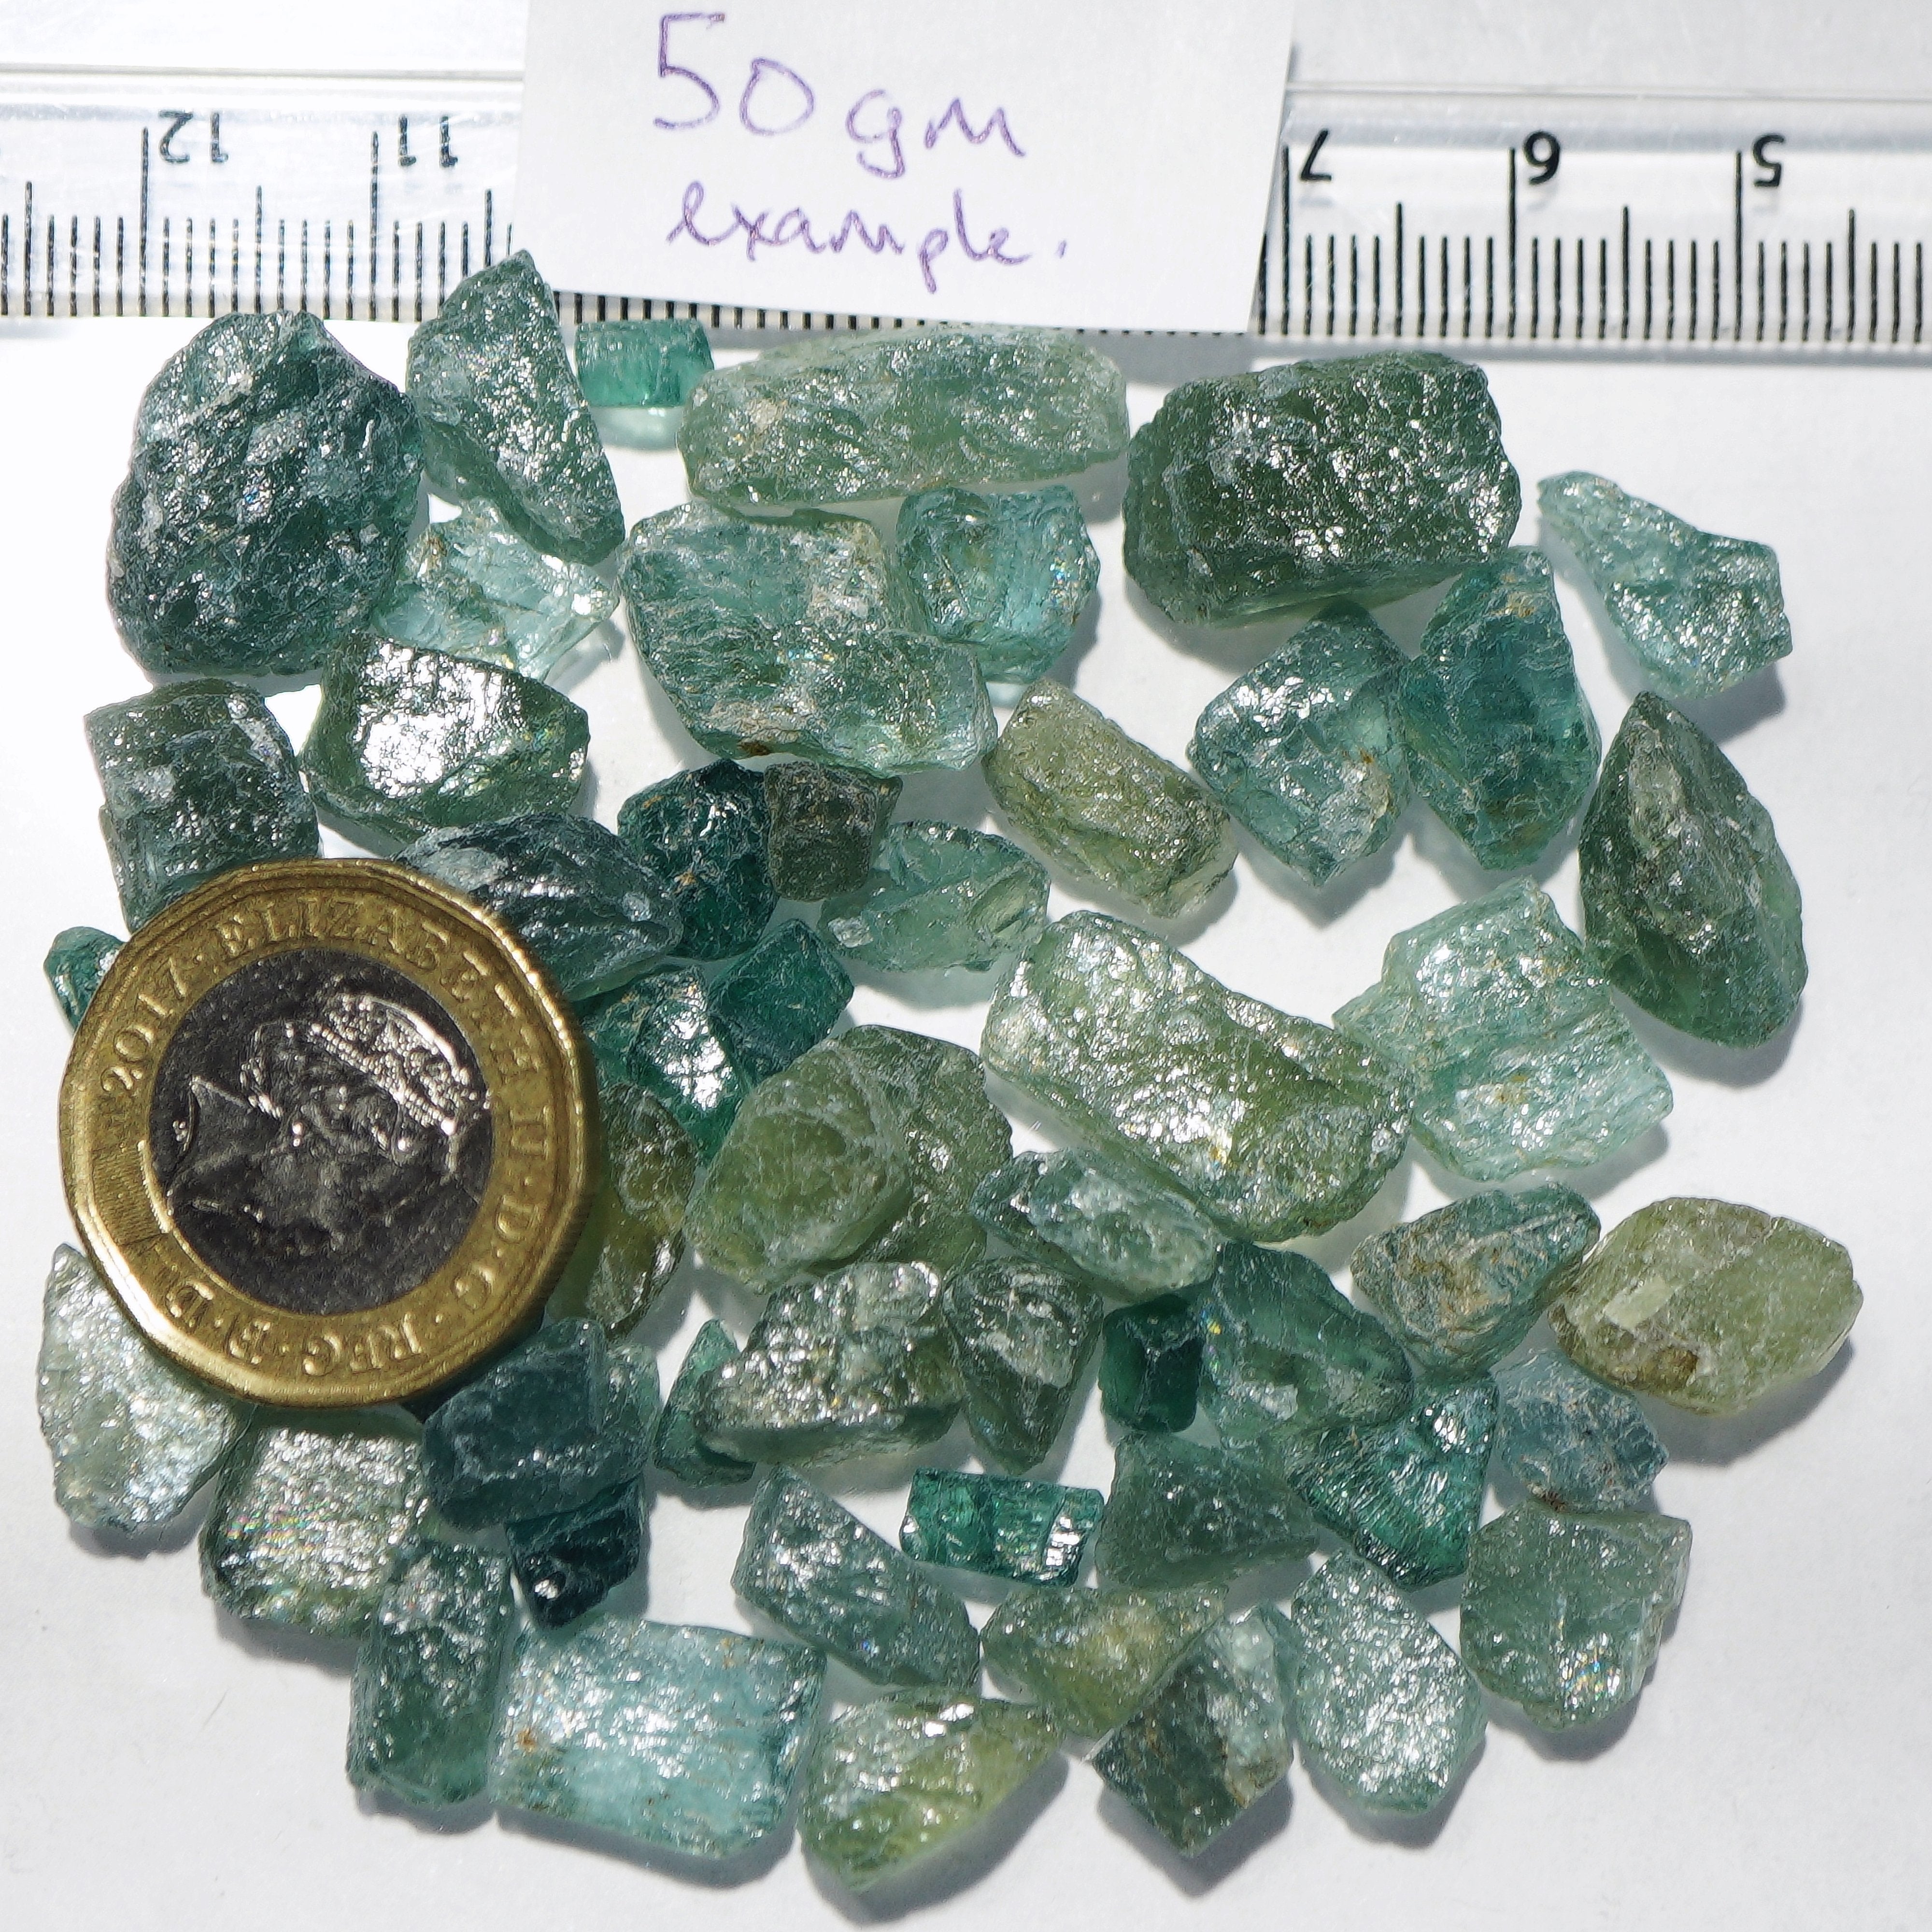 50G Blue Green Apatite Lots From Tanzania Blind Pour 0.2Gm - 3Gm- Buy As Much You Like